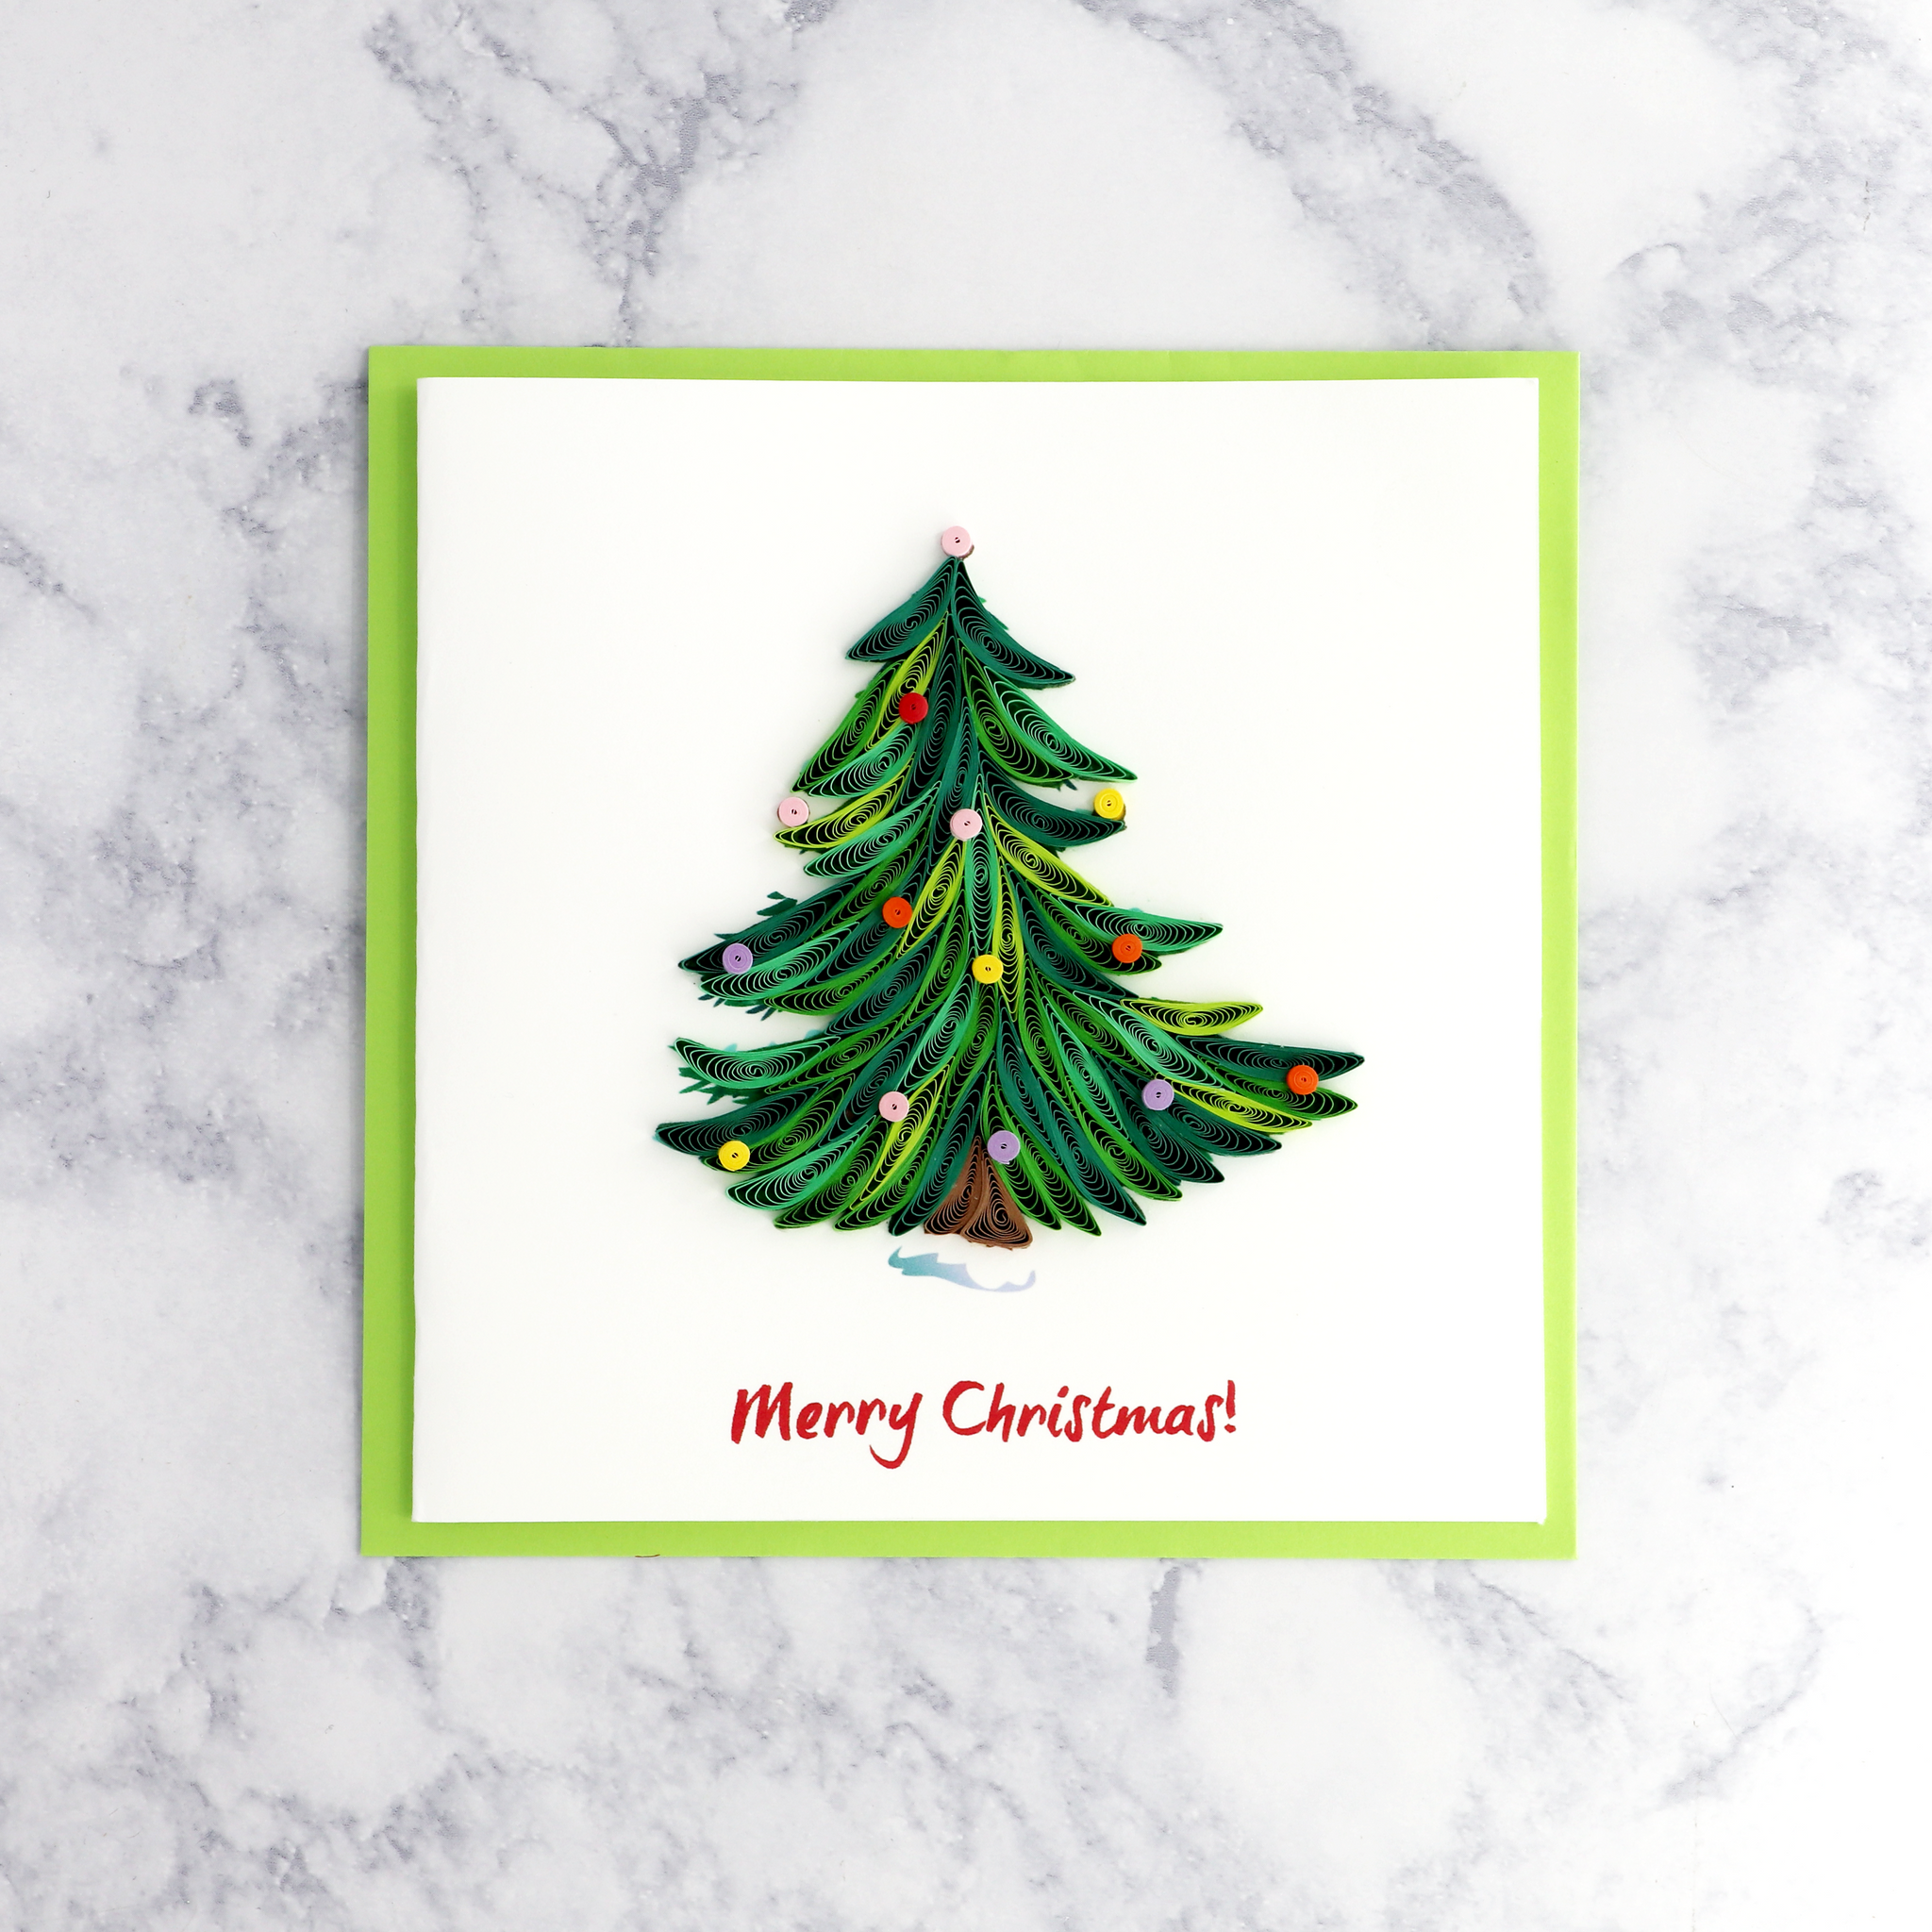 Christmas Tree & Ornaments Quilling Christmas Card